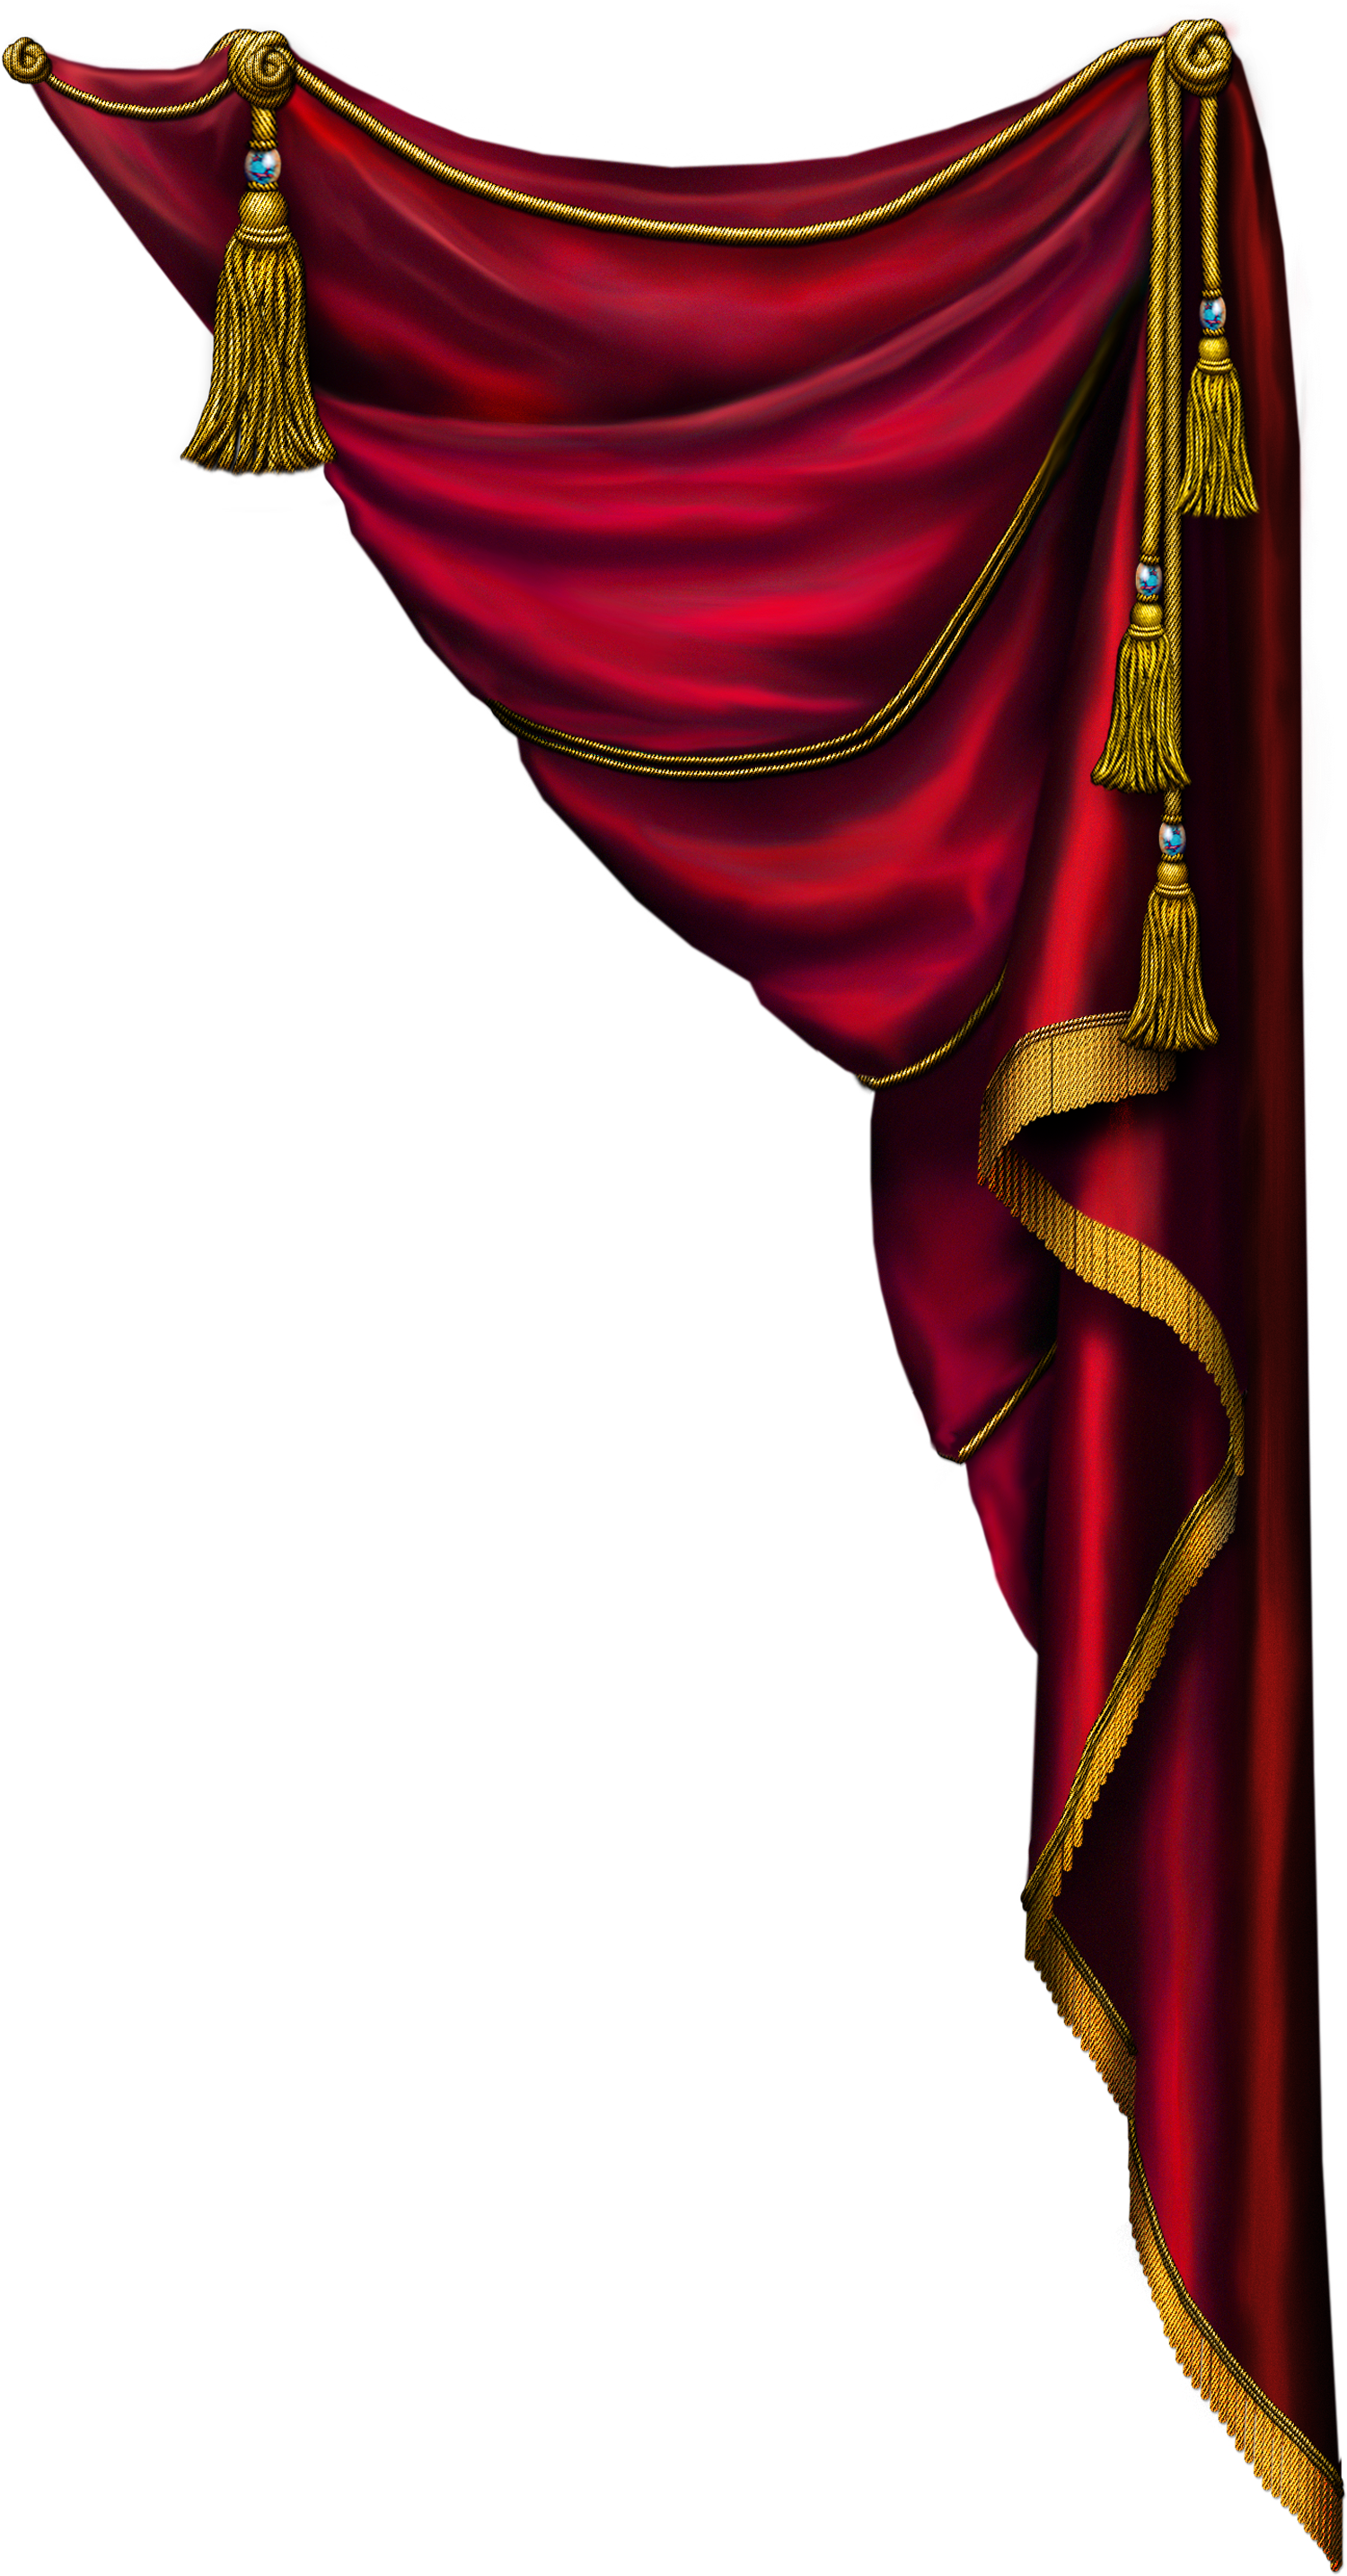 Elegant Red Curtainwith Gold Trim PNG image